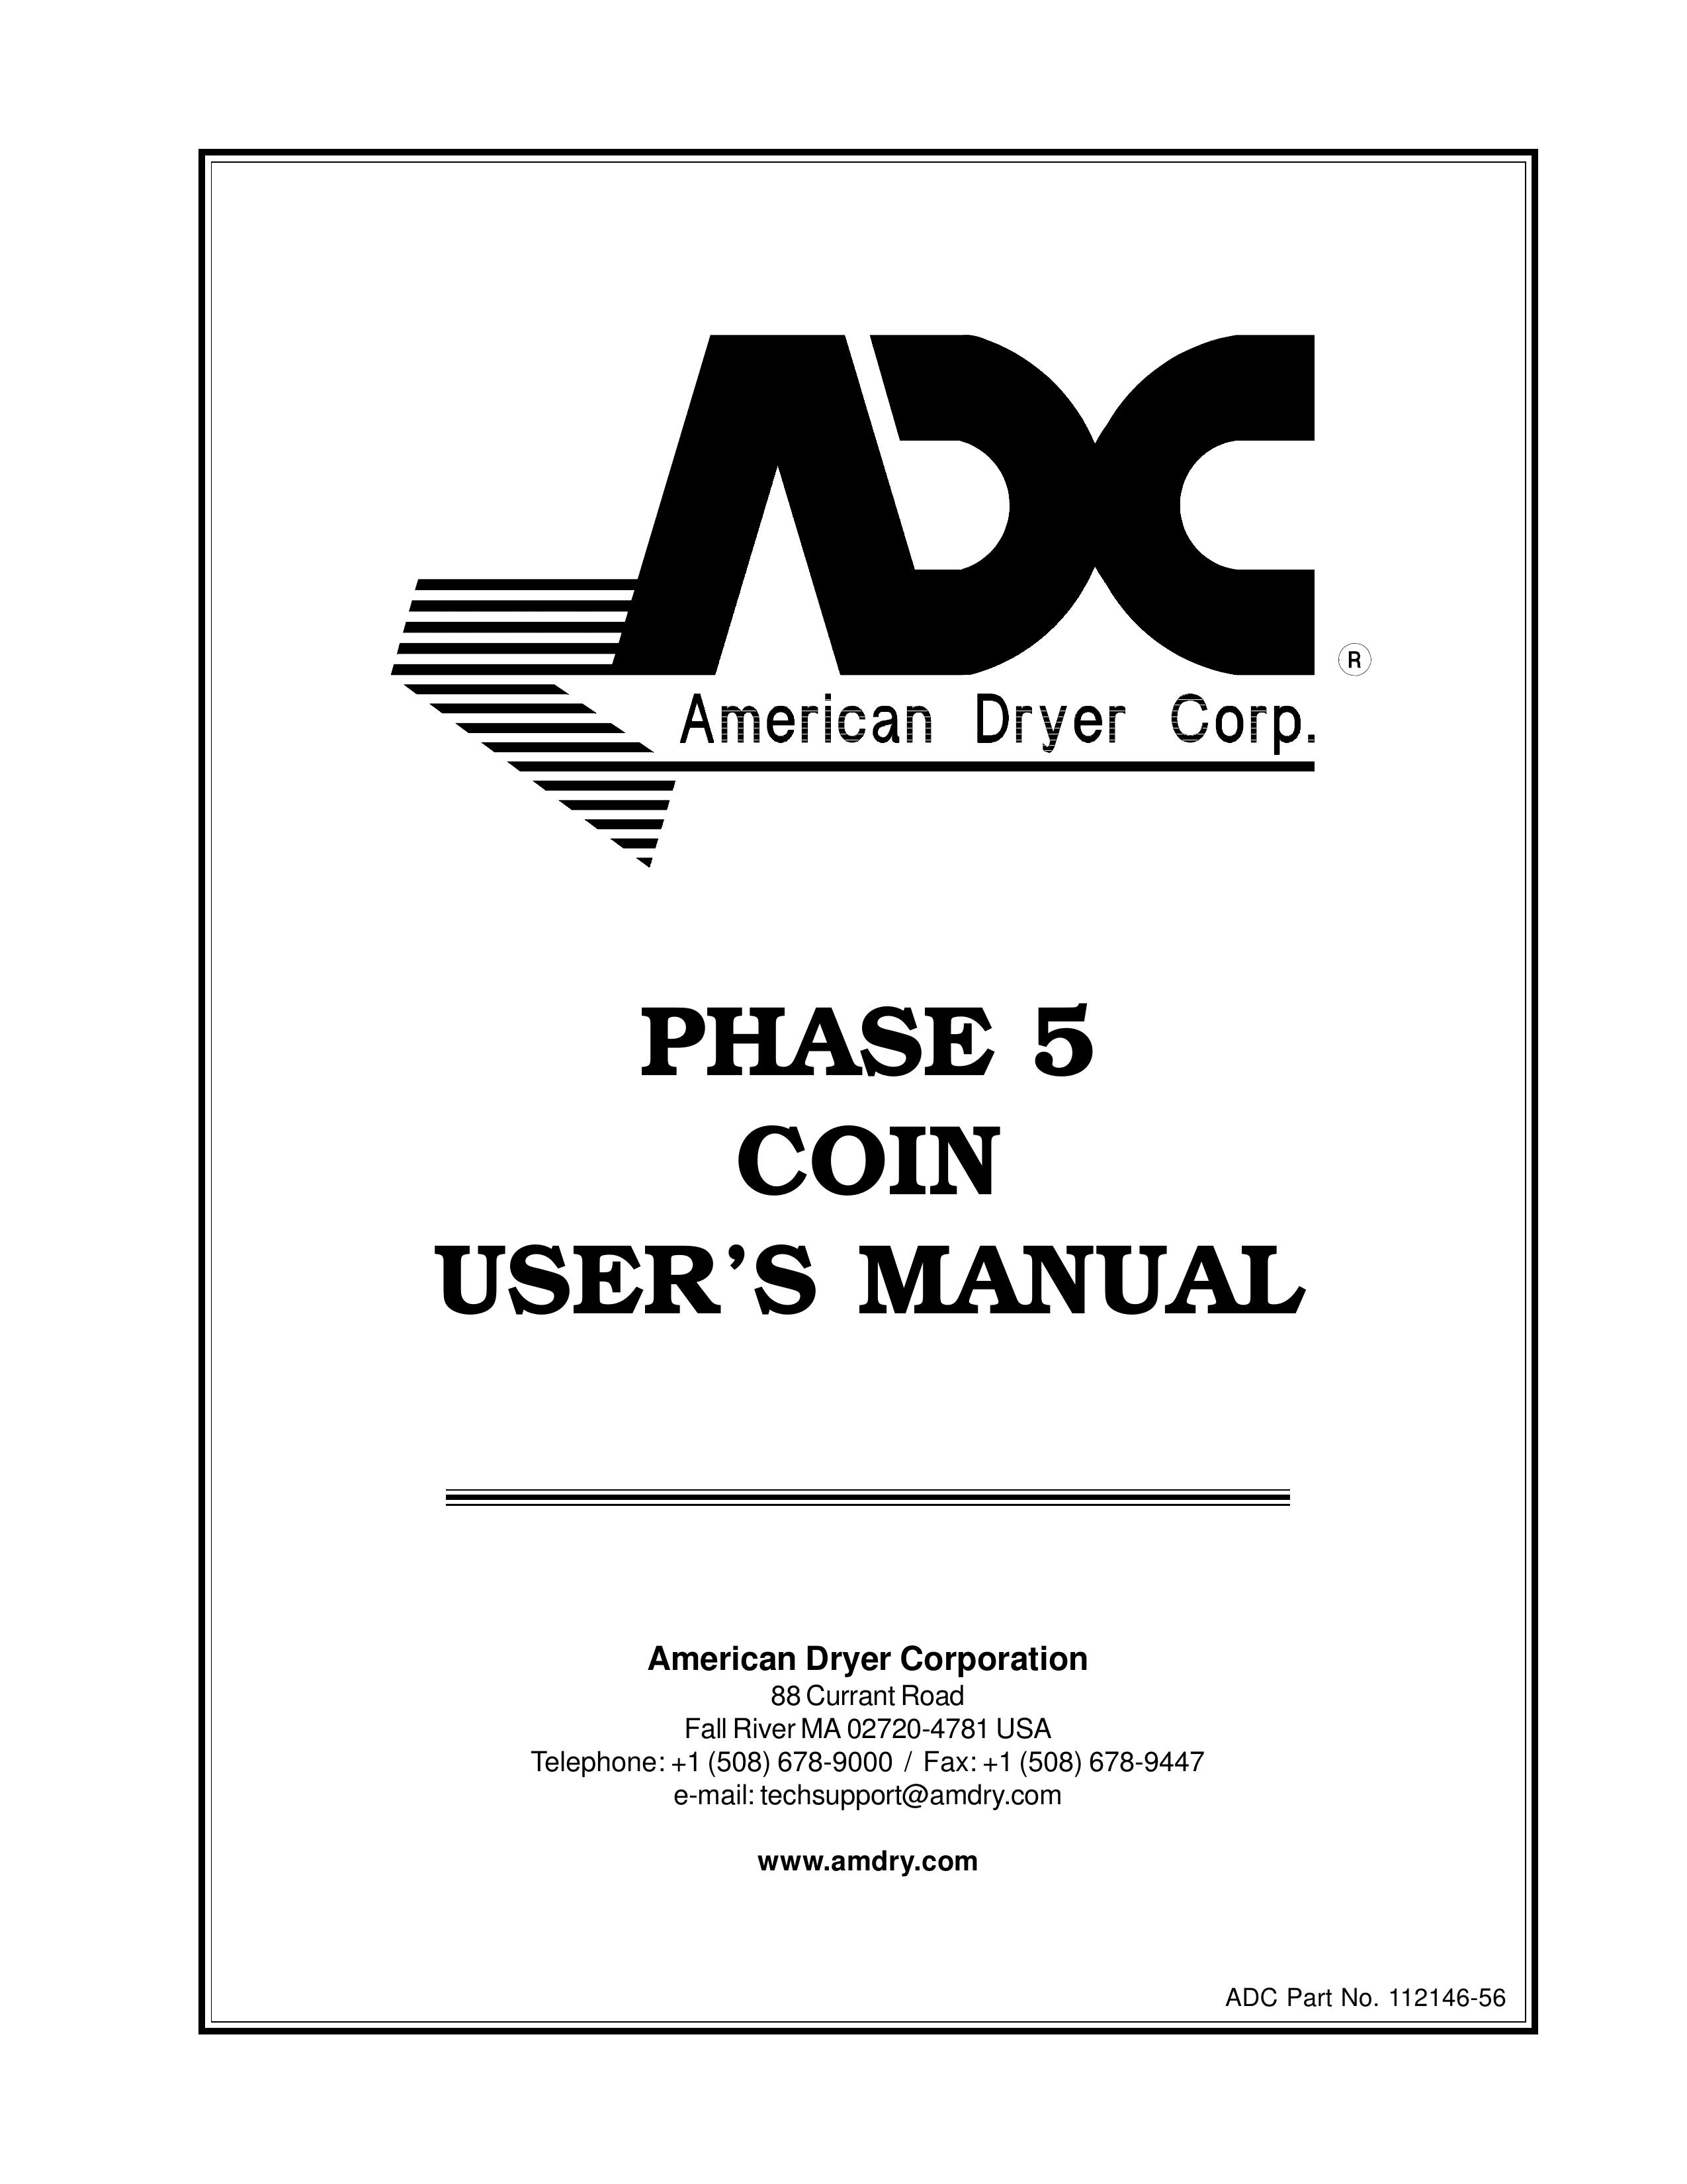 ADC WDA-540 Clothes Dryer User Manual